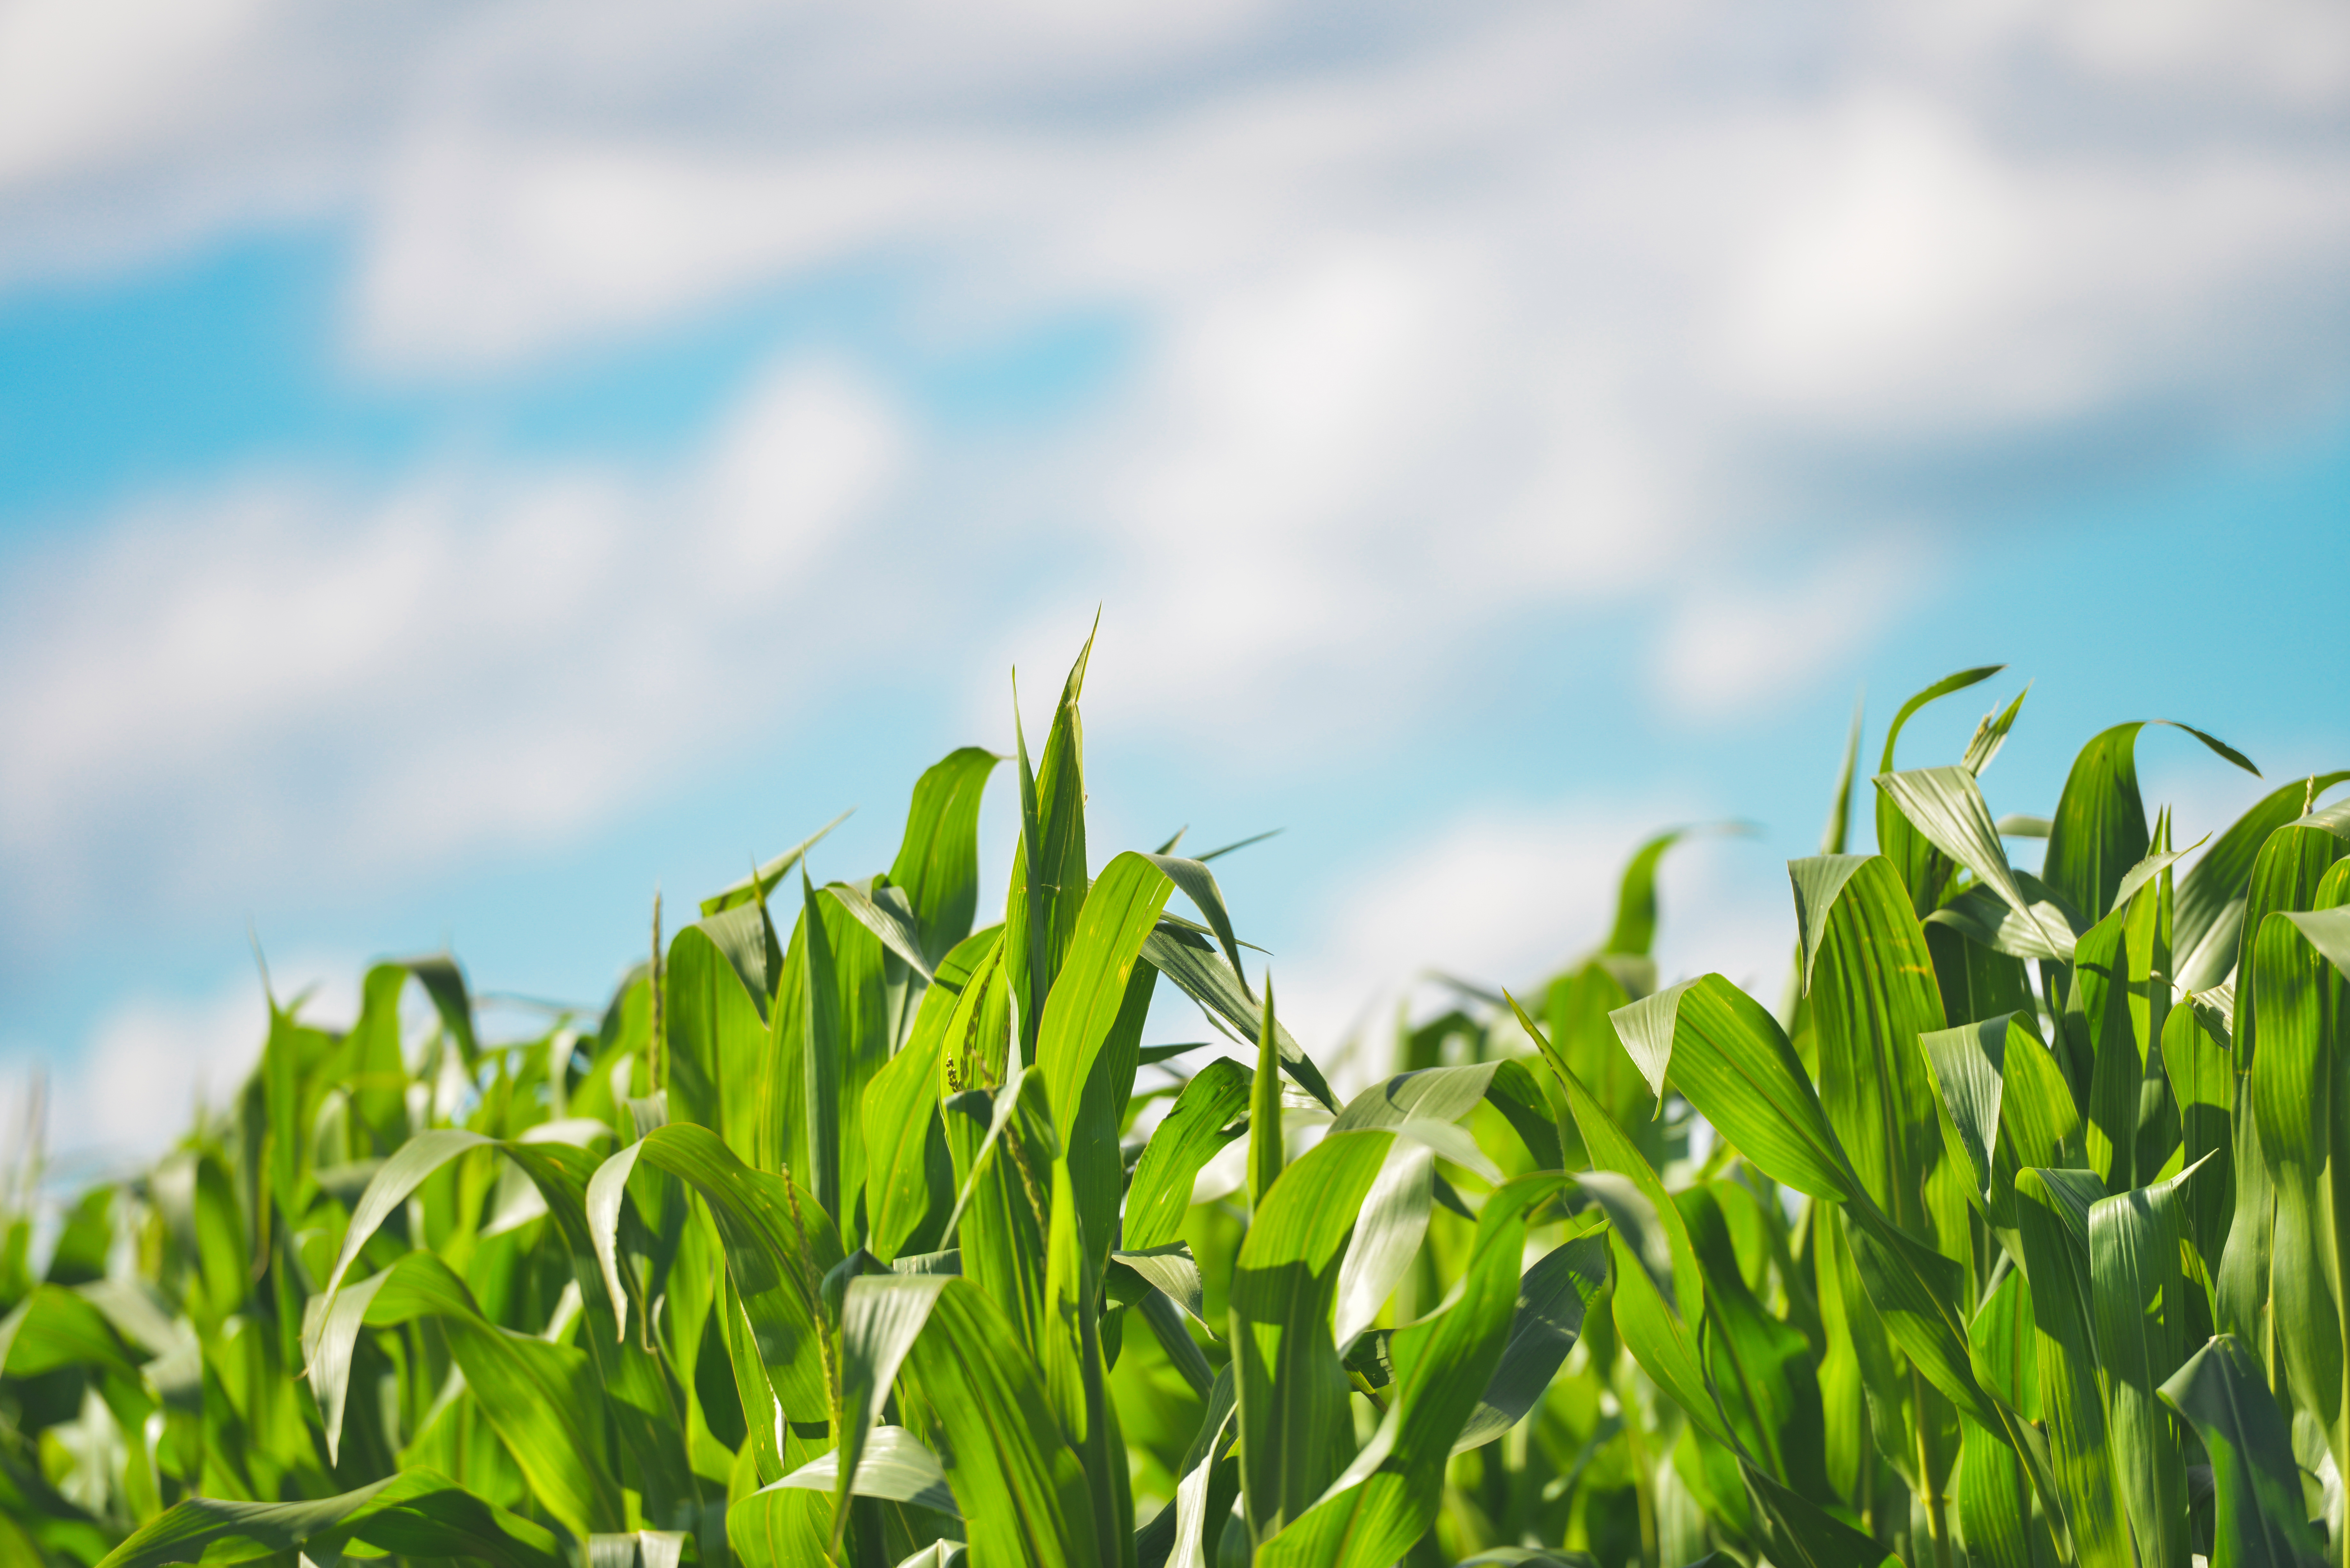 What Do Farmers Need to Know About Climate Change? Nitrogen Management Pilot Project